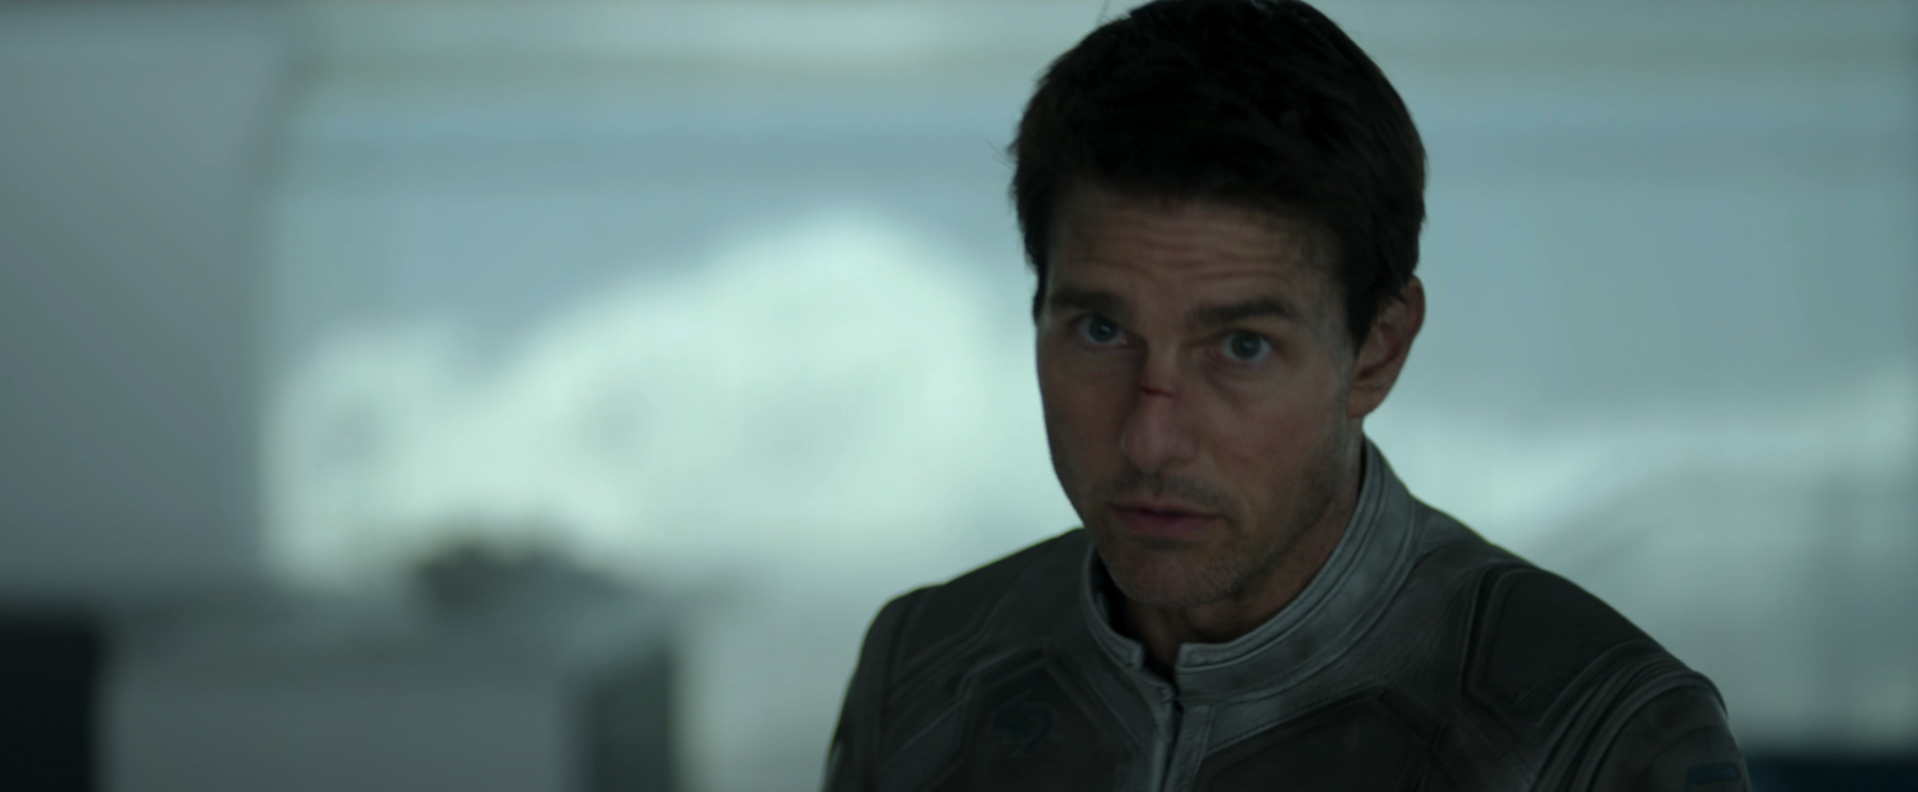 Tom Cruise earns more than the studios on his movies